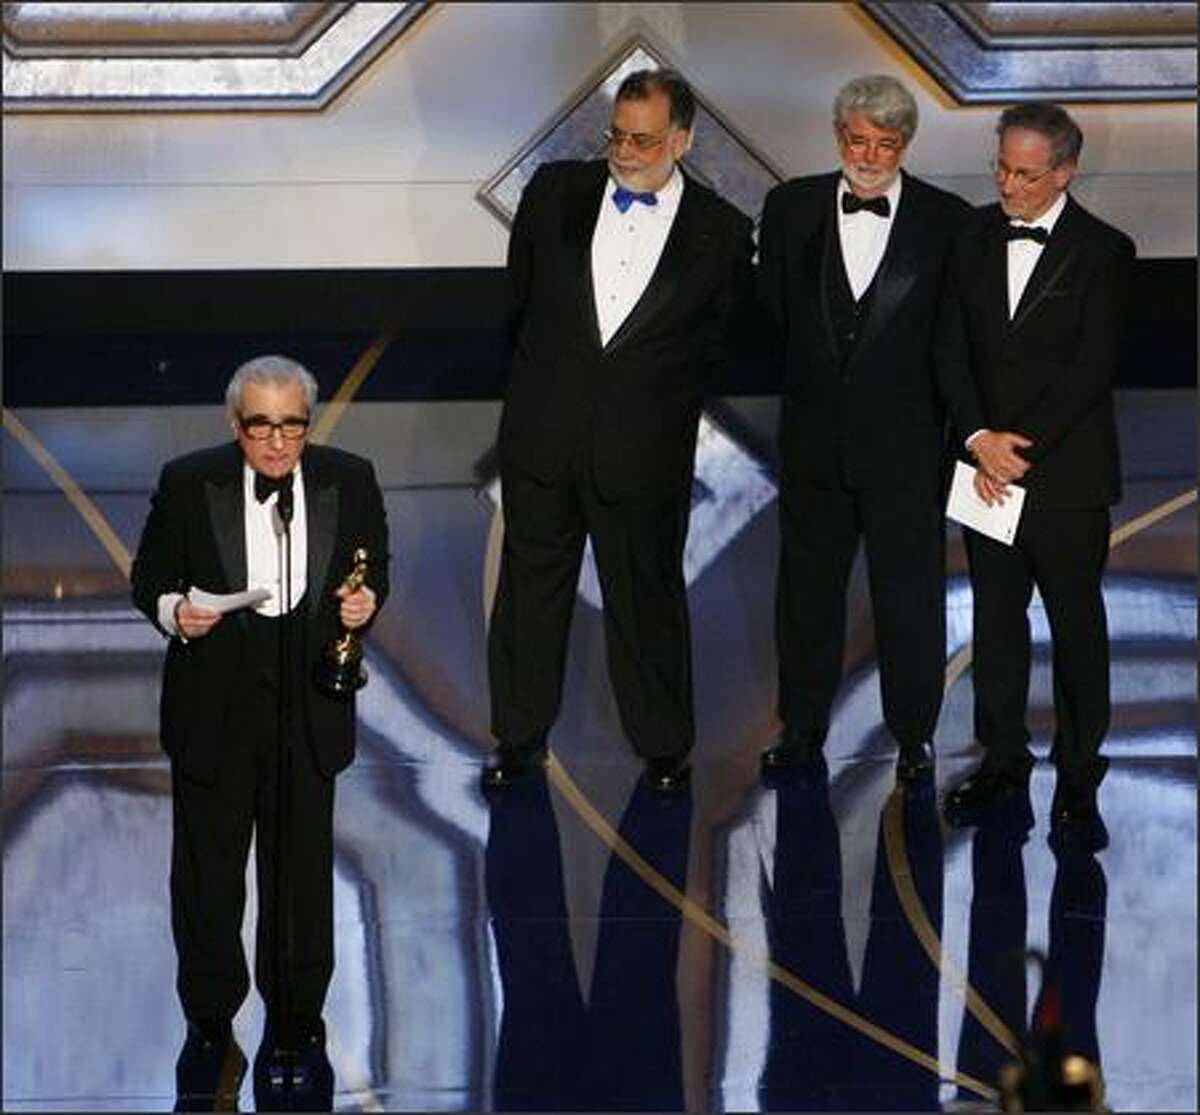 Director Martin Scorsese accepts the Oscar for best director for his work on "The Departed" as directors from left, Francis Ford Coppola, George Lucas and Steven Spielberg look on at the 79th Academy Awards Sunday in Los Angeles. (AP Photo/Mark J. Terrill)